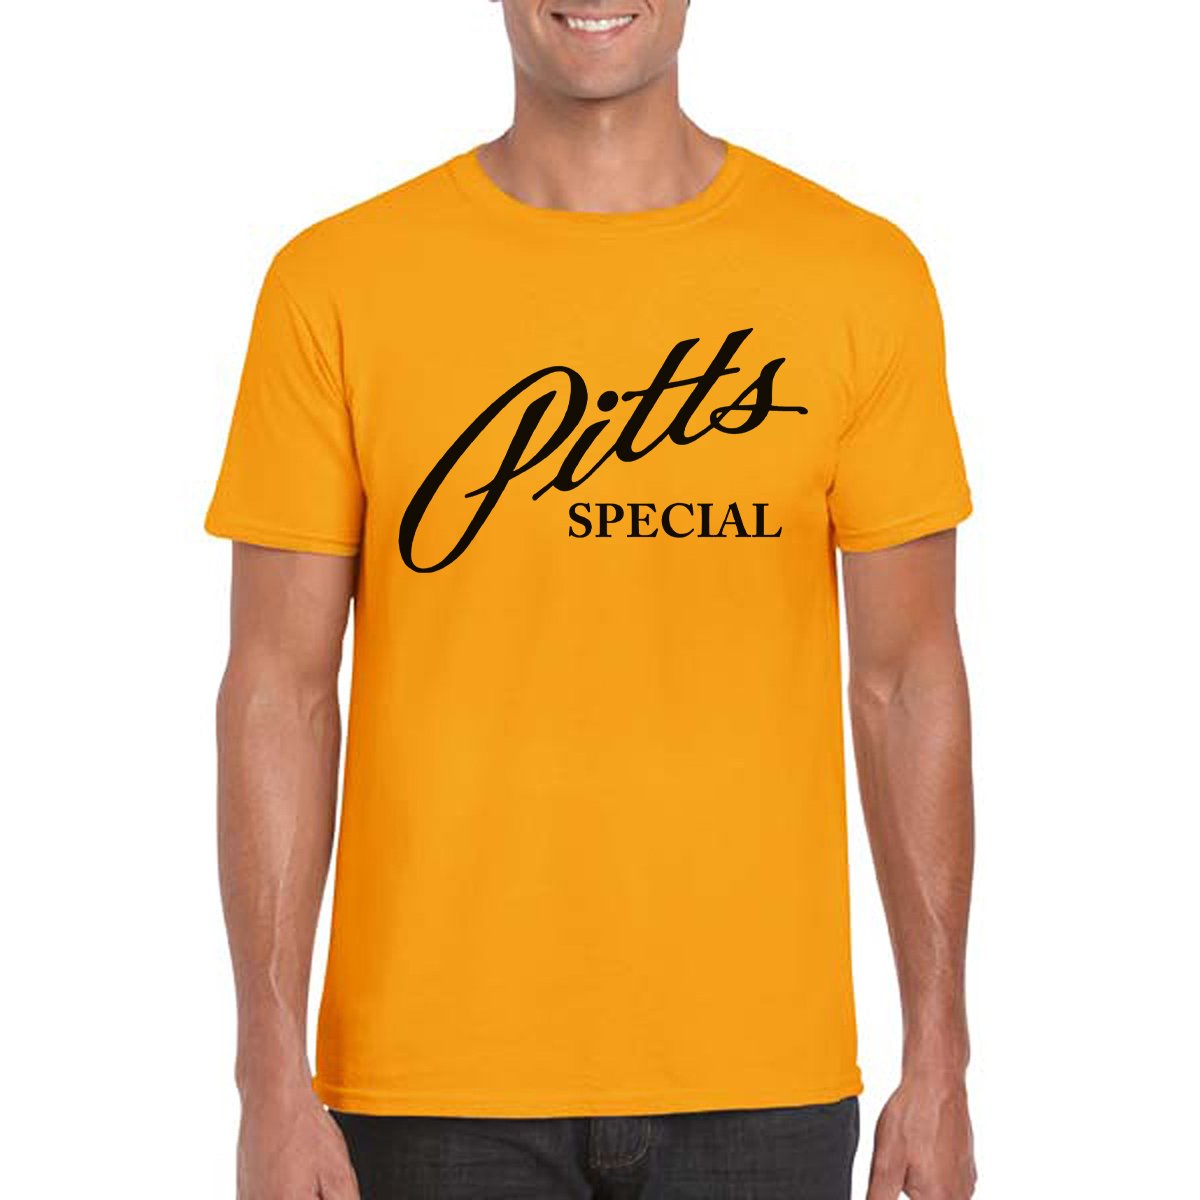 PITTS SPECIAL Unisex Classic T-Shirt